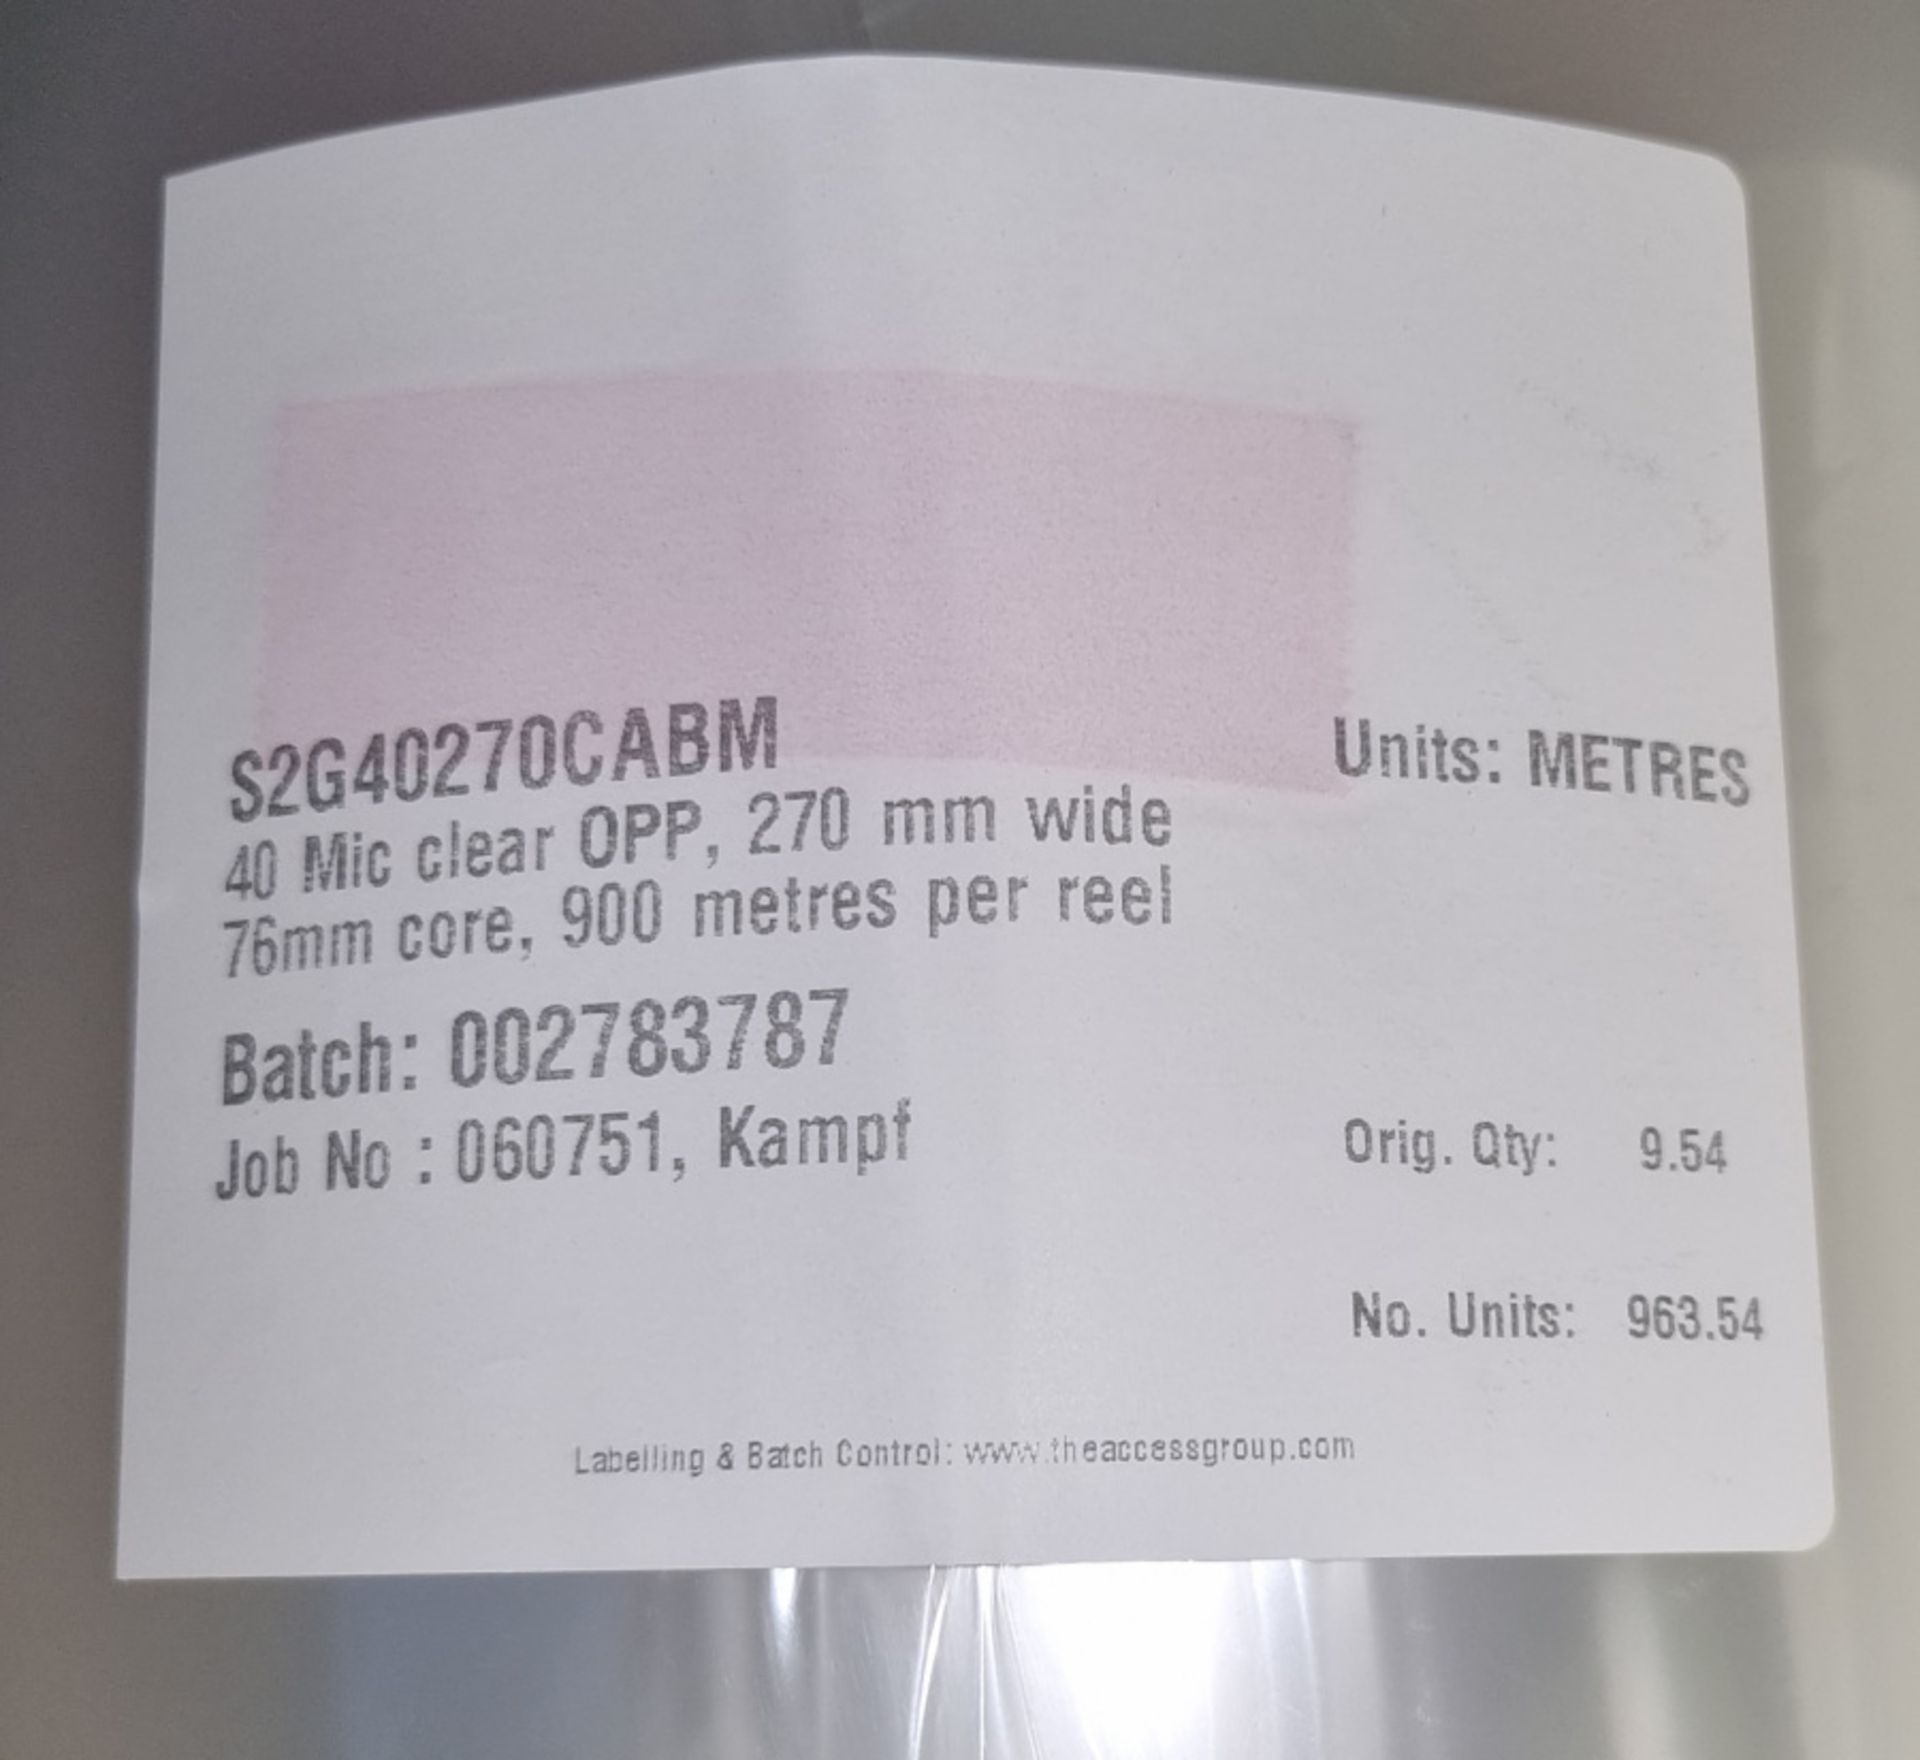 37x Rolls of 40 micron clear OPP - W270mm x 900m - Image 3 of 3